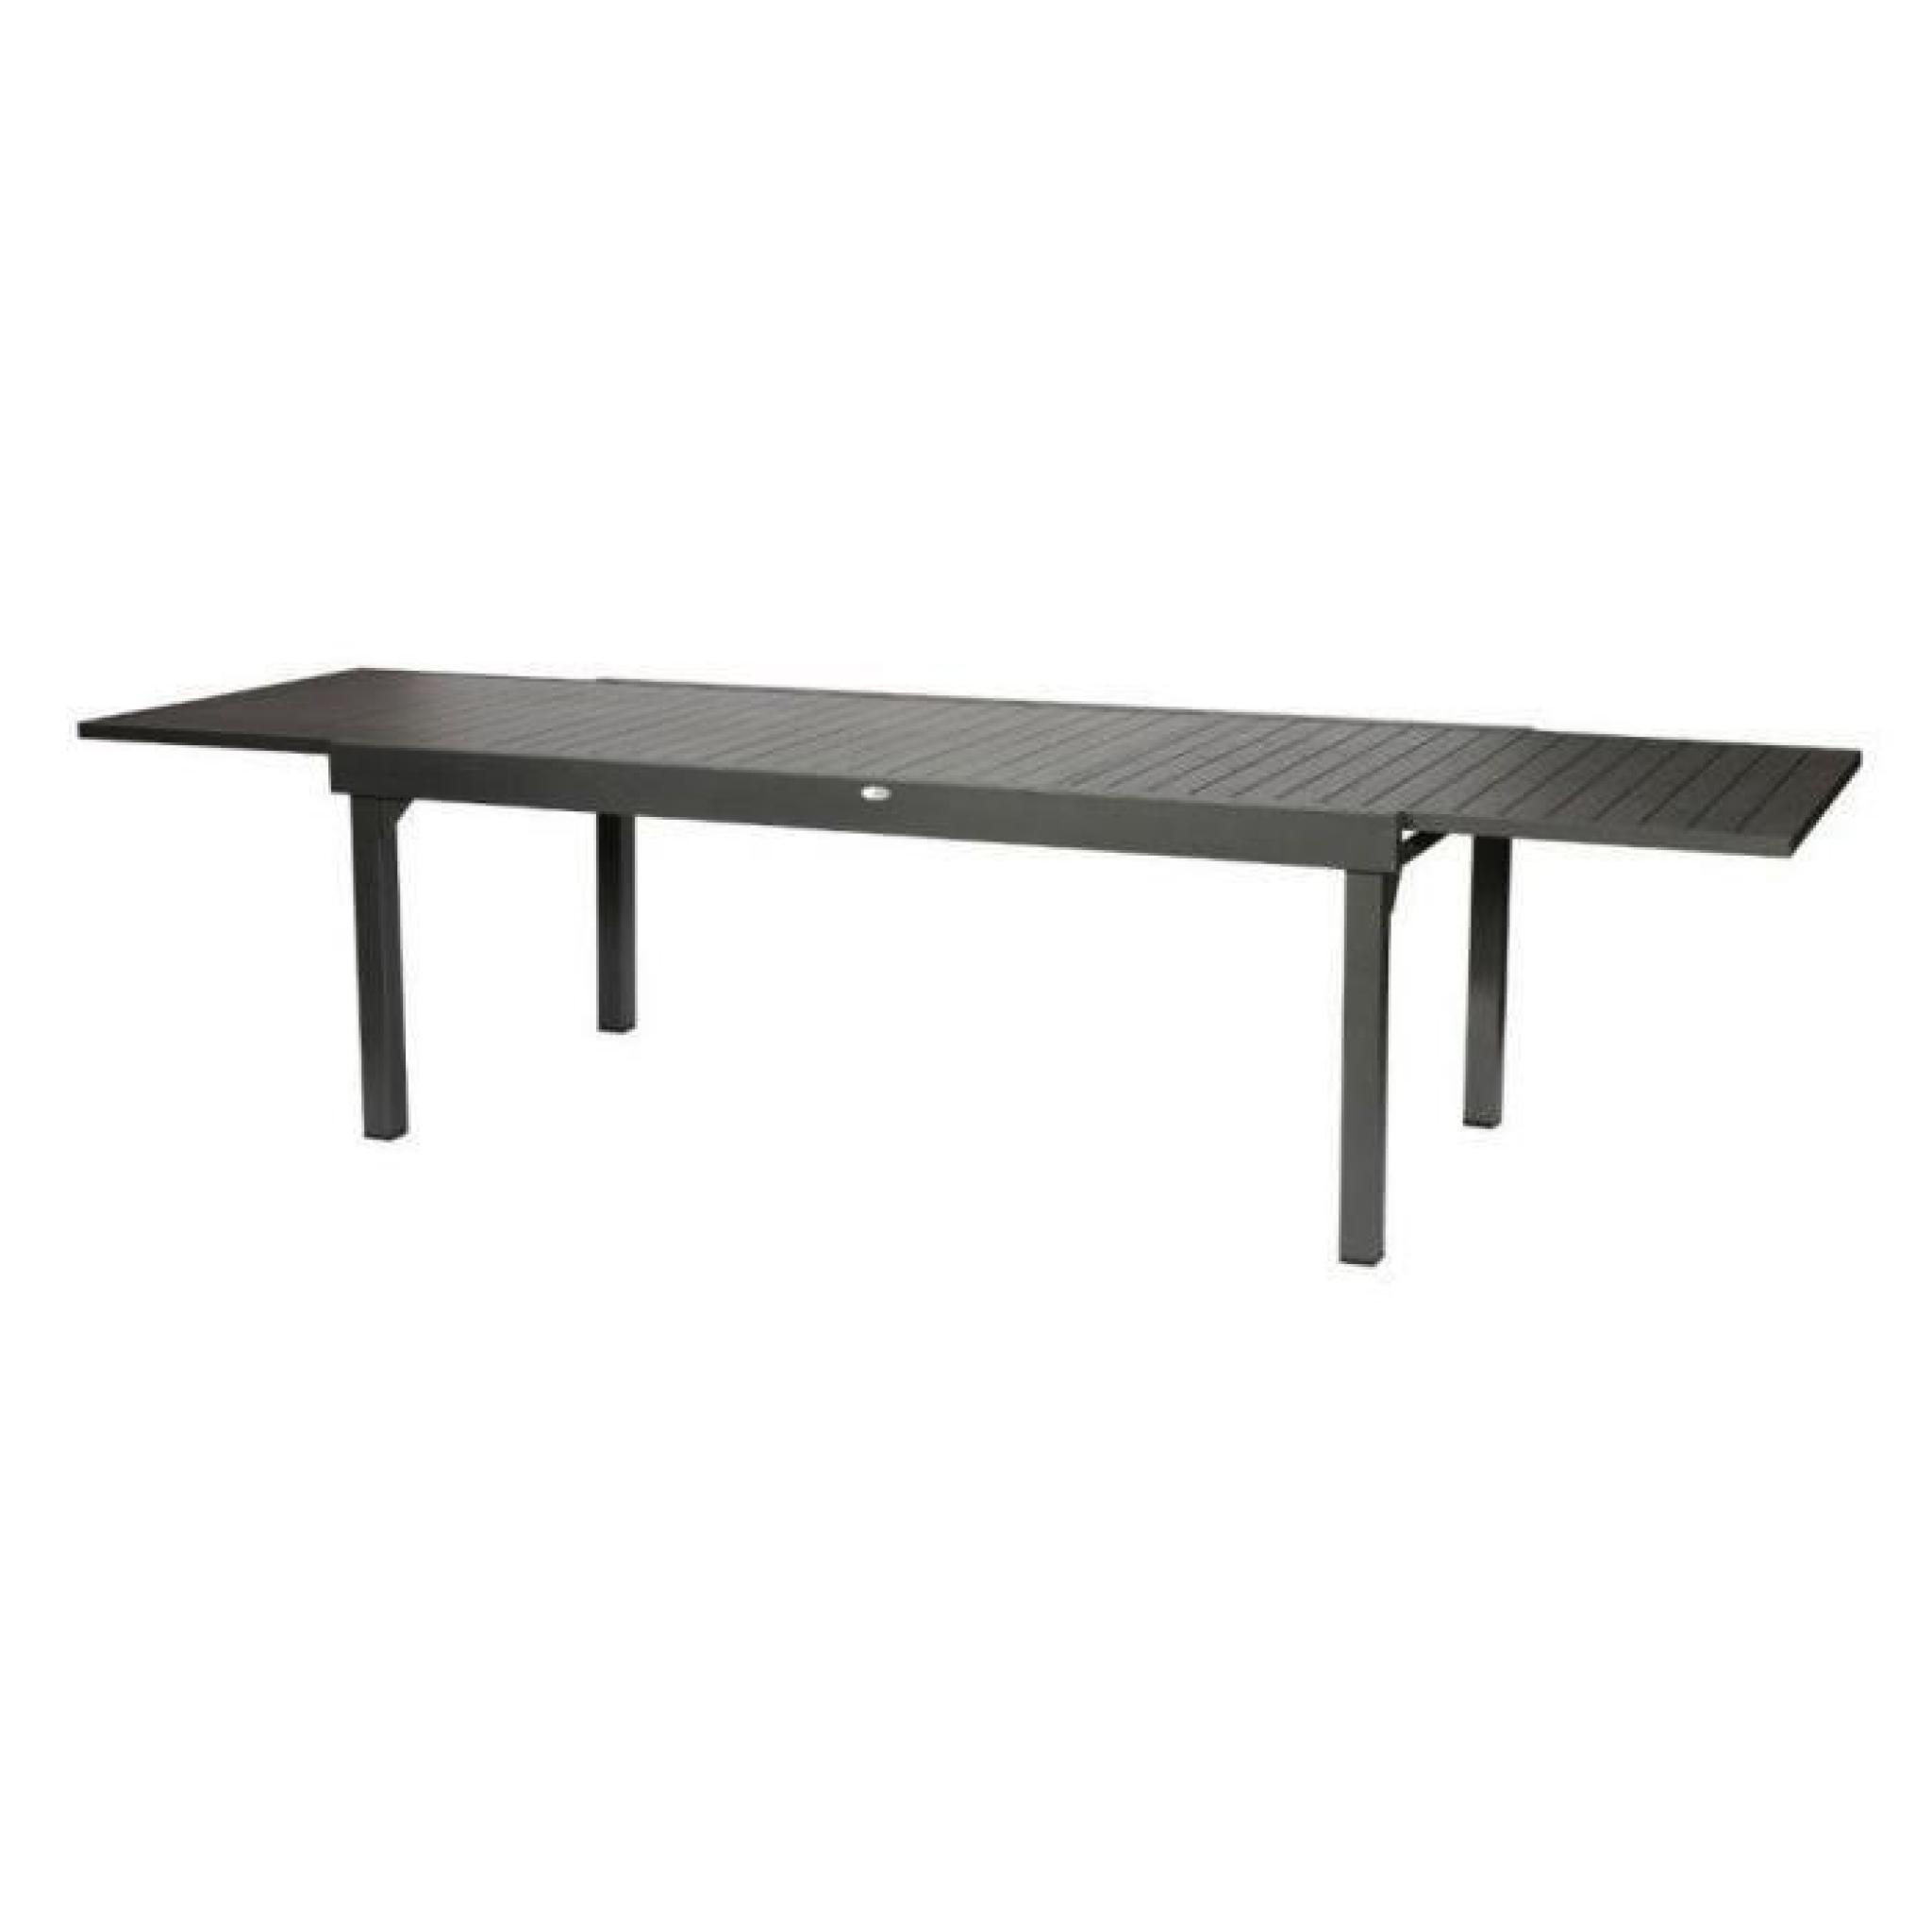 TABLE PIAZZA ALU HESPERIDE EXTENSIBLE 12 P. GRAPHITE pas cher